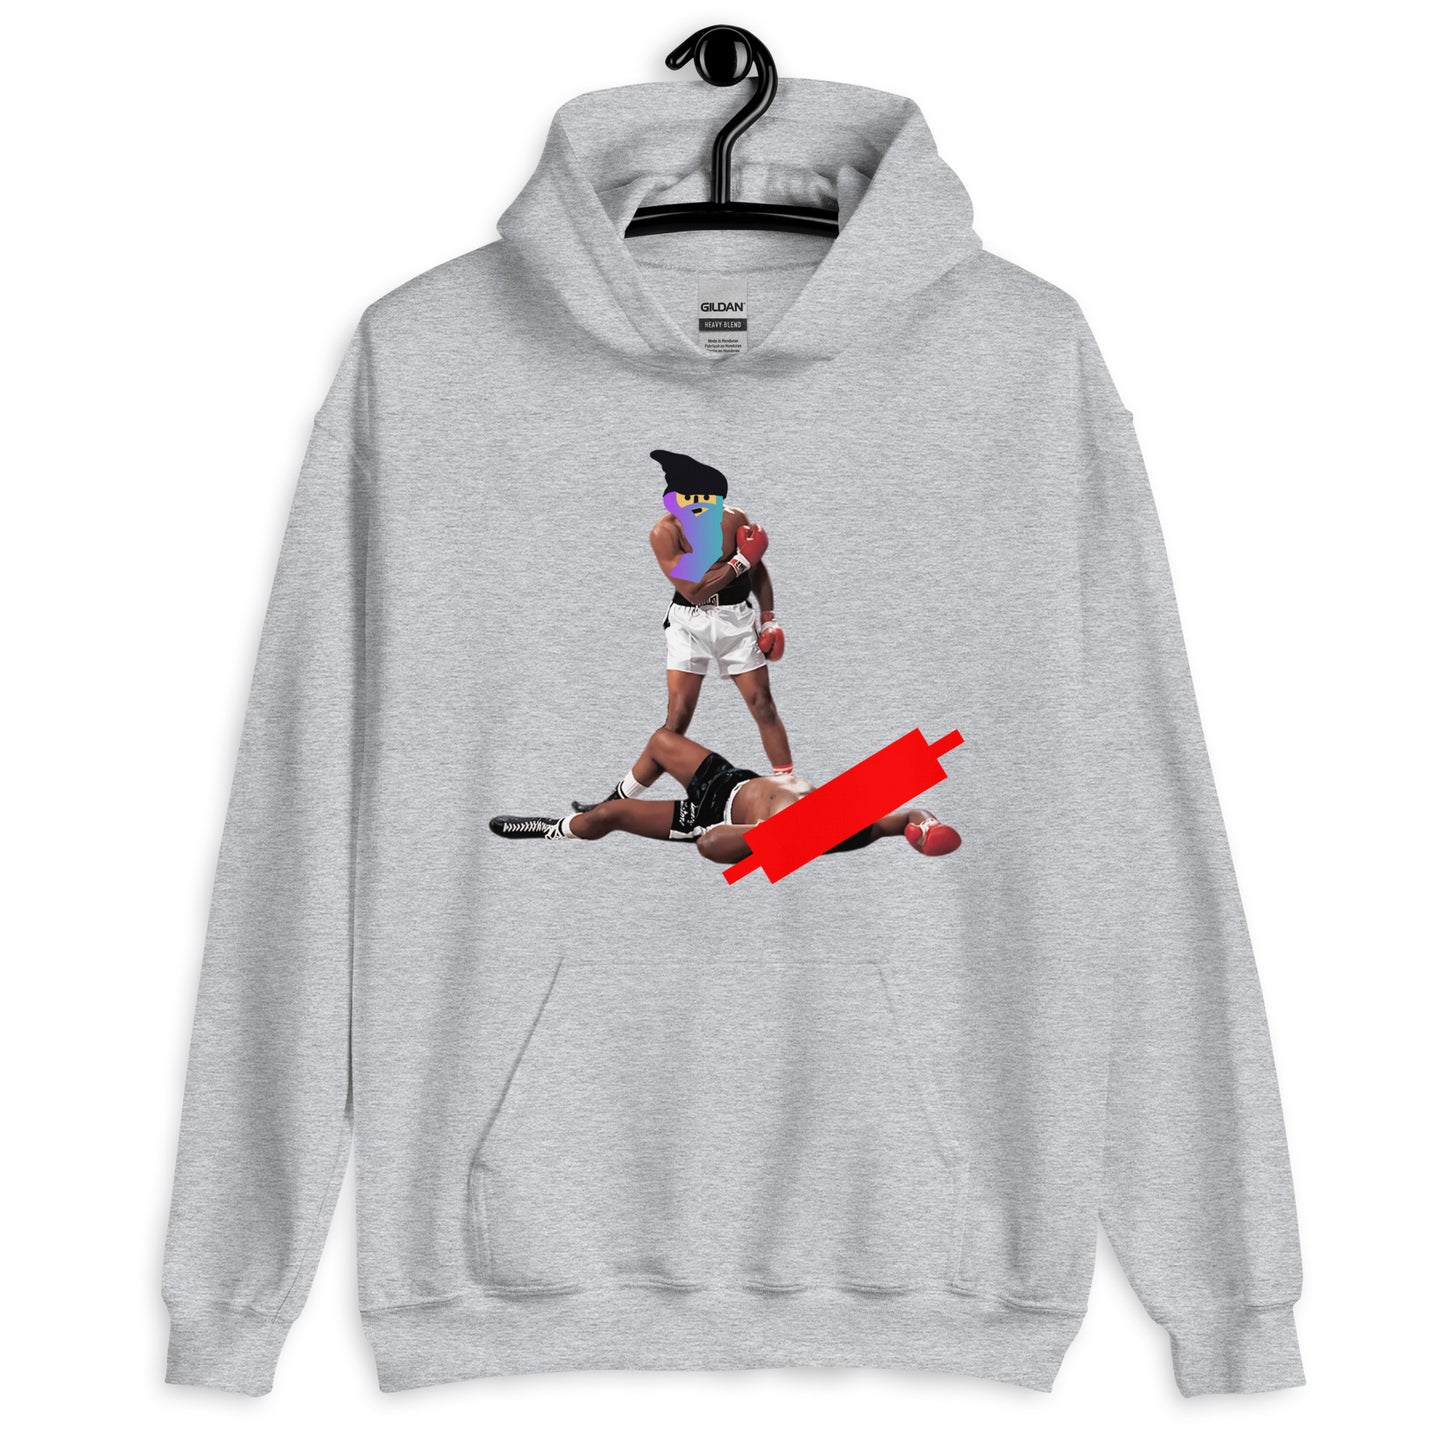 Knock Out Hoodie